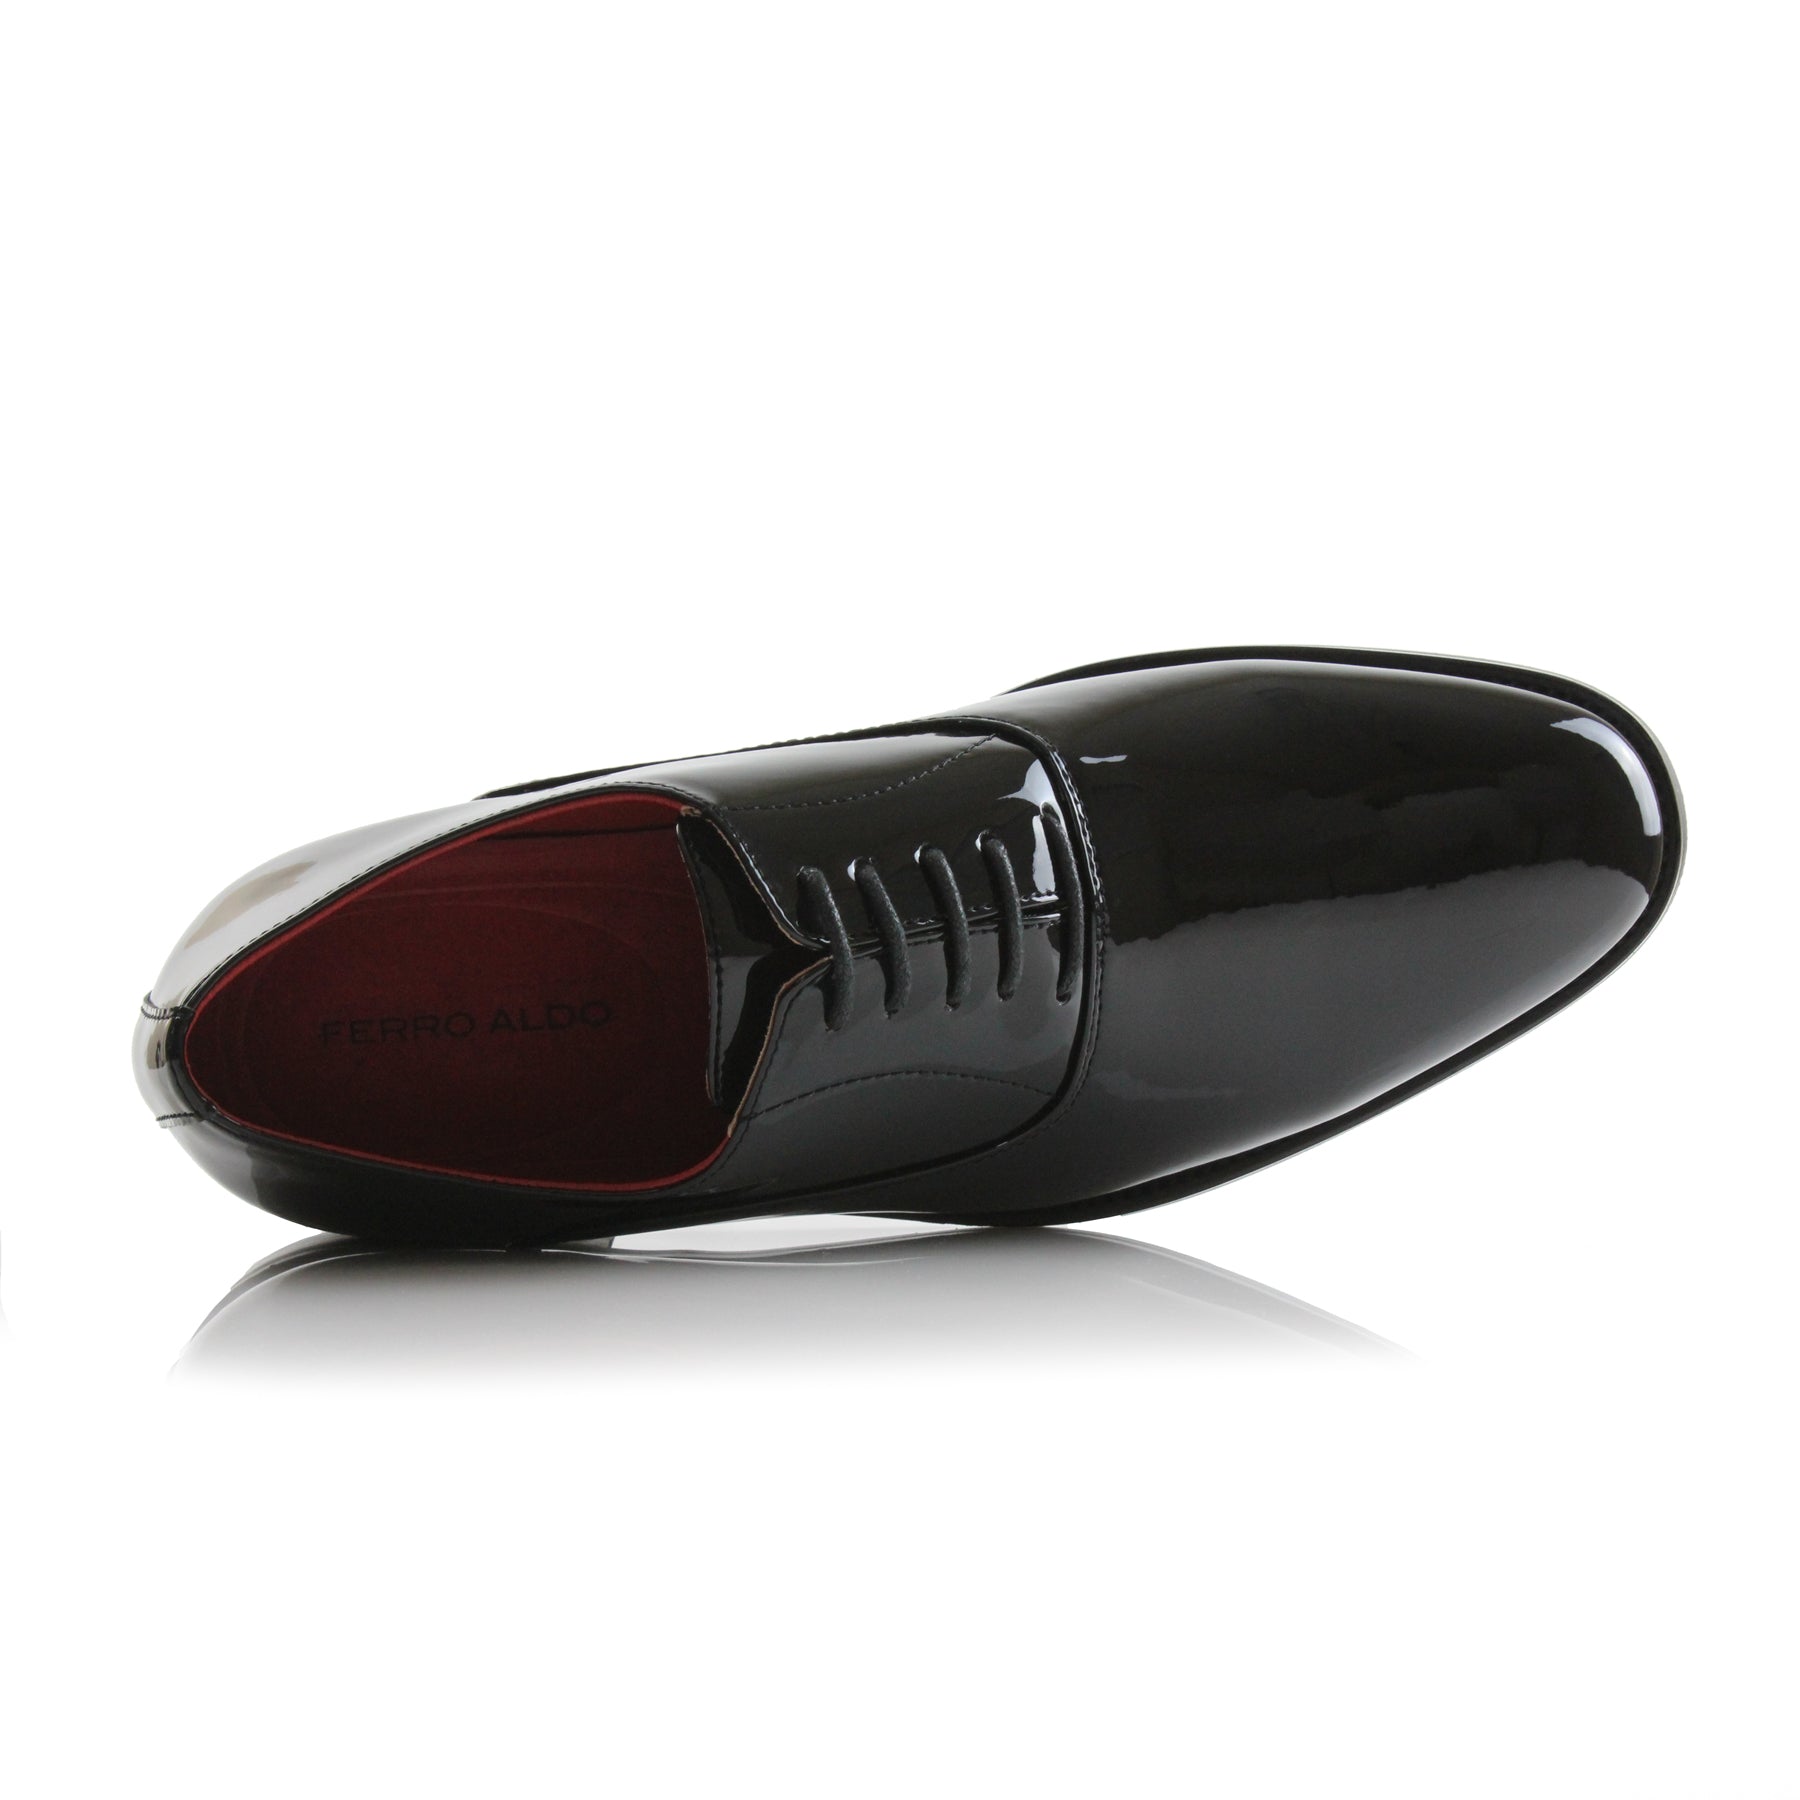 Faux Patent Leather Oxfords | George by Ferro Aldo | Conal Footwear | Top-Down Angle View